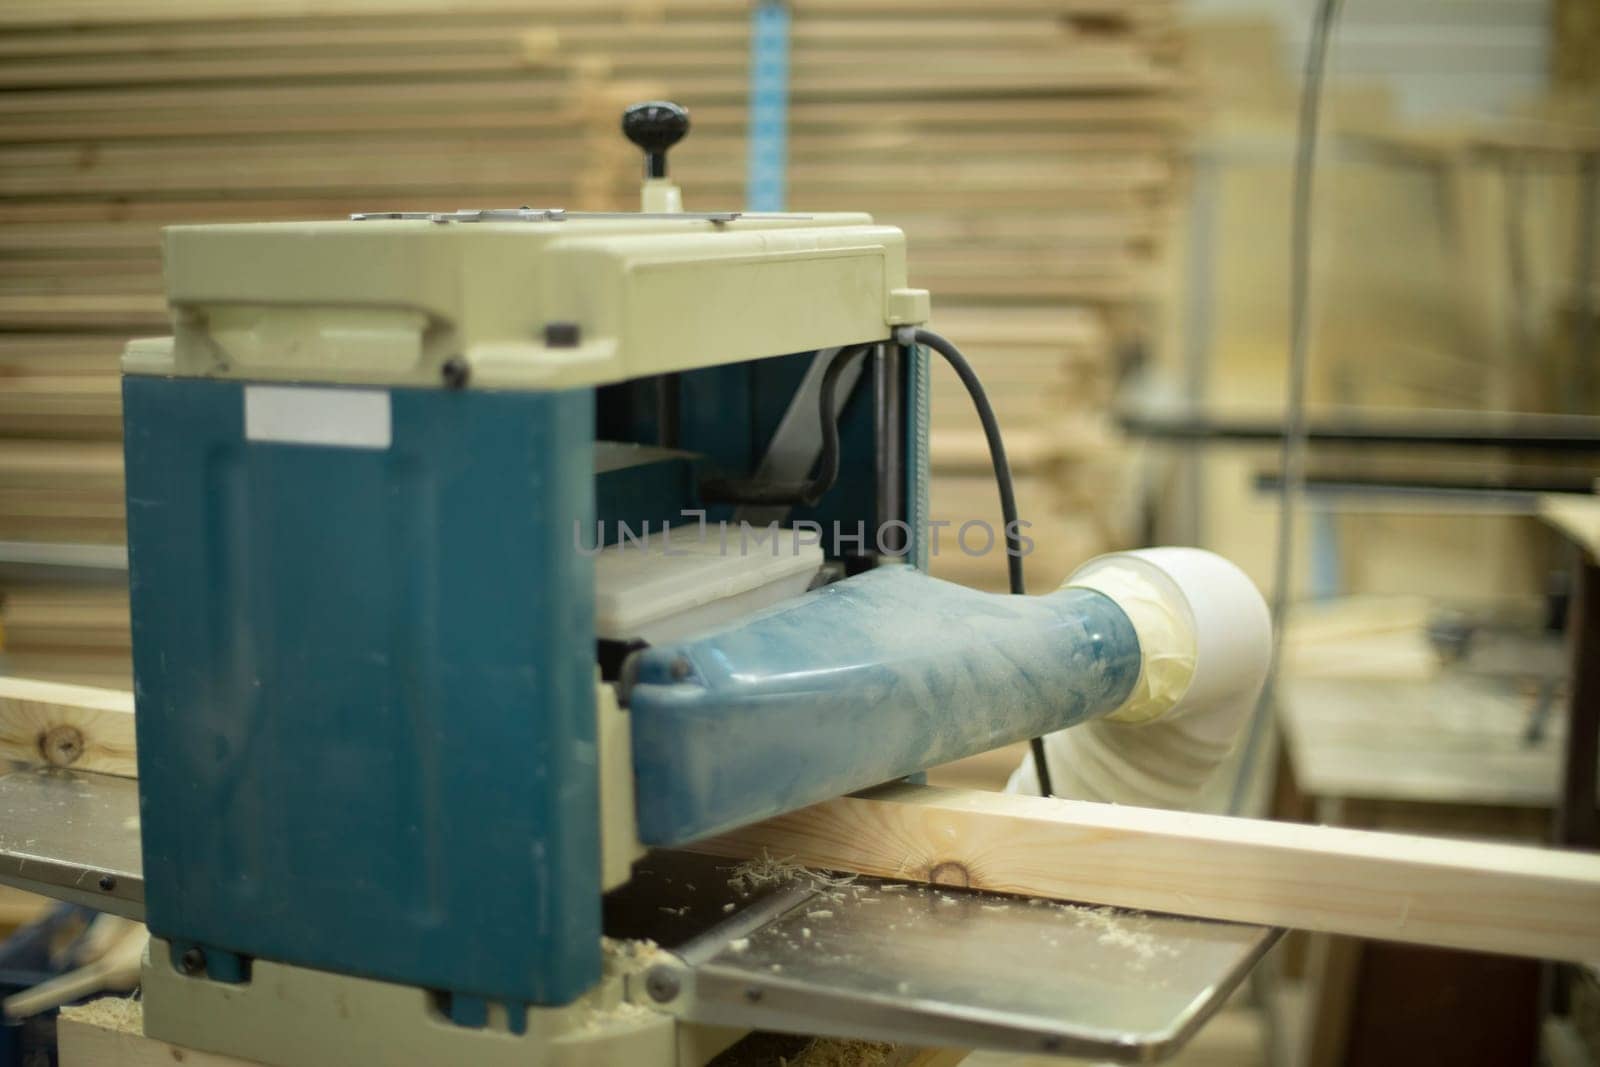 Wood processing. Chipping board. Manufacture of furniture. Joinery. Hand holds board. Sawing board.